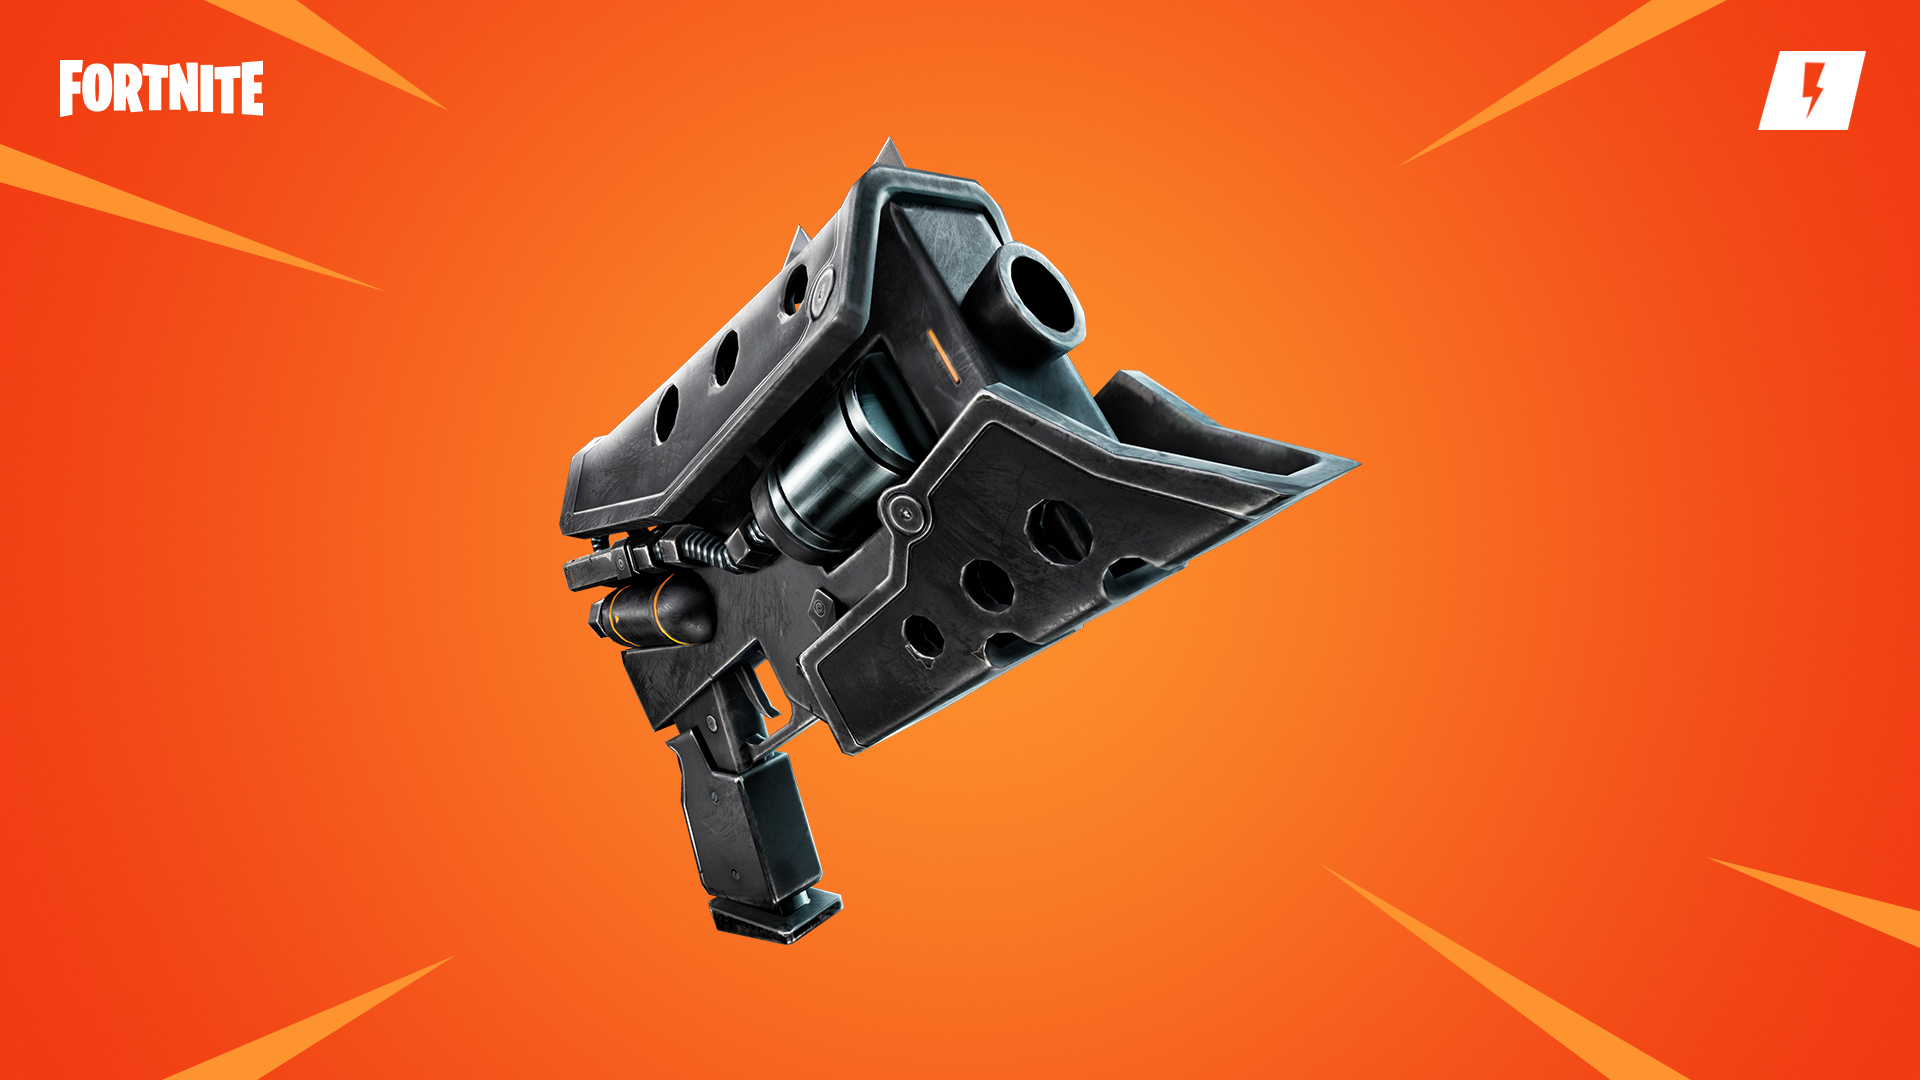 Unveiling The Unvaulted Submachine Gun In Fortnite Media Referee